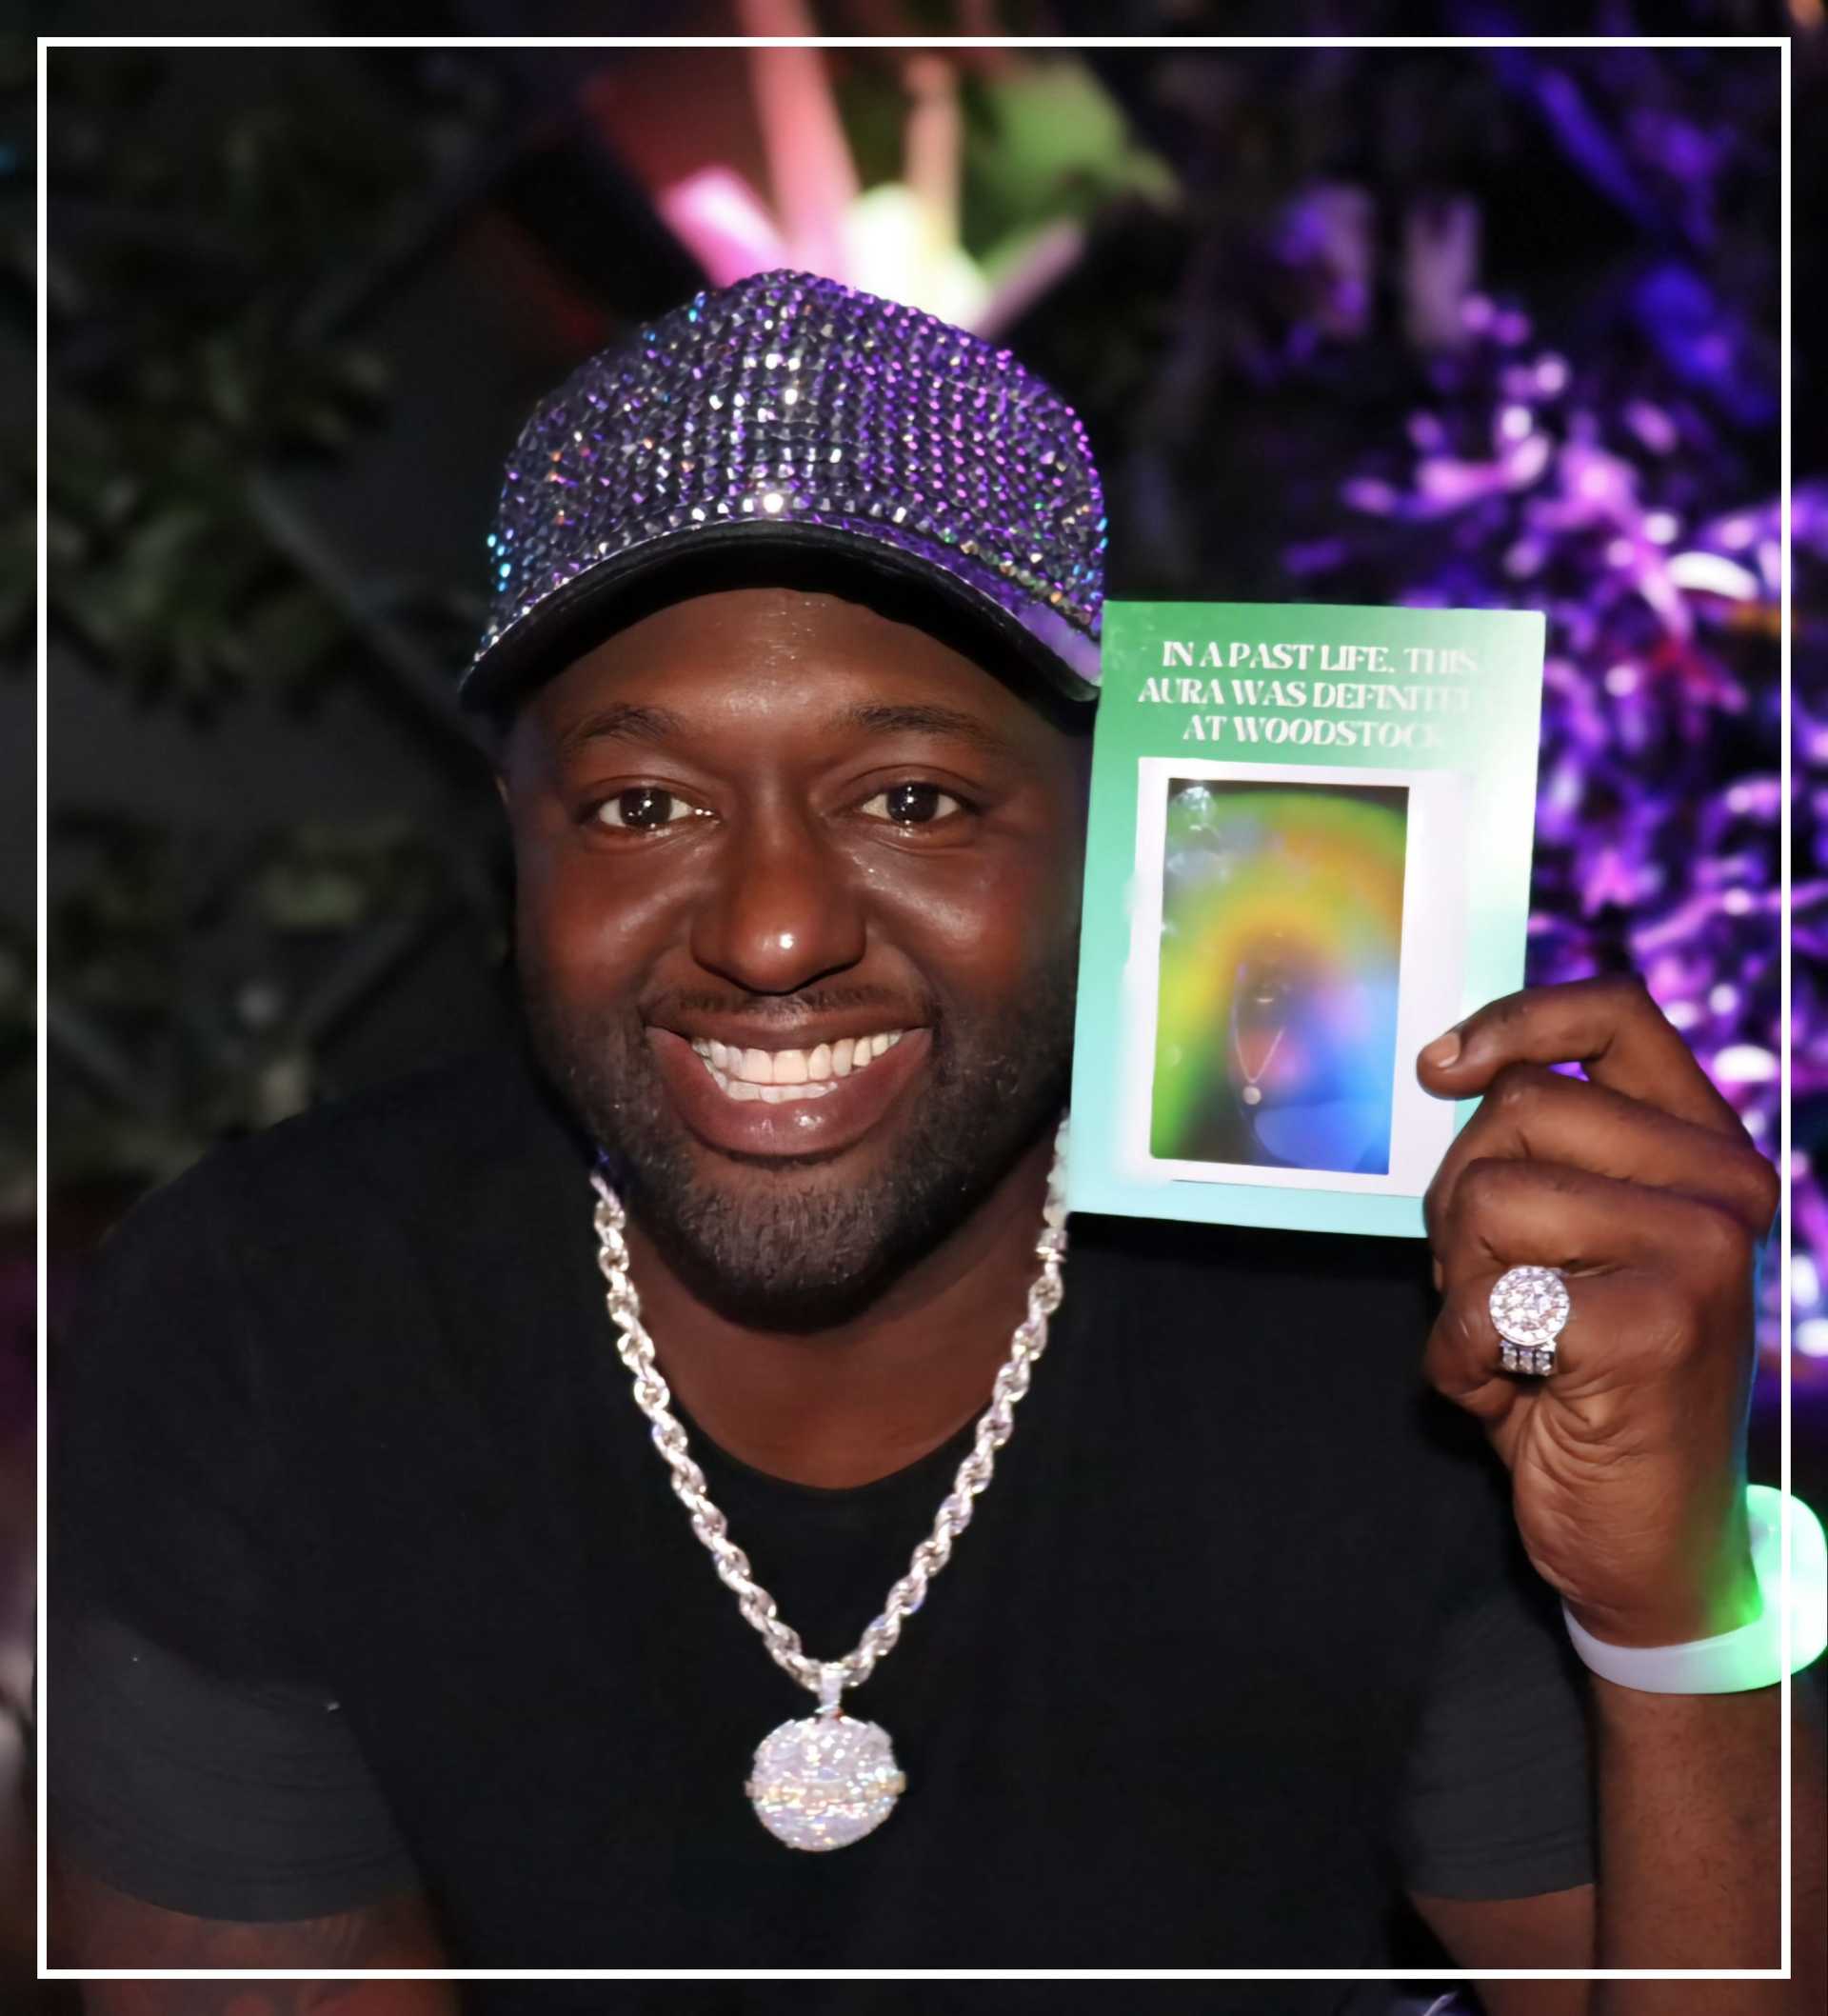 A man is holding an Aura Photo in the event